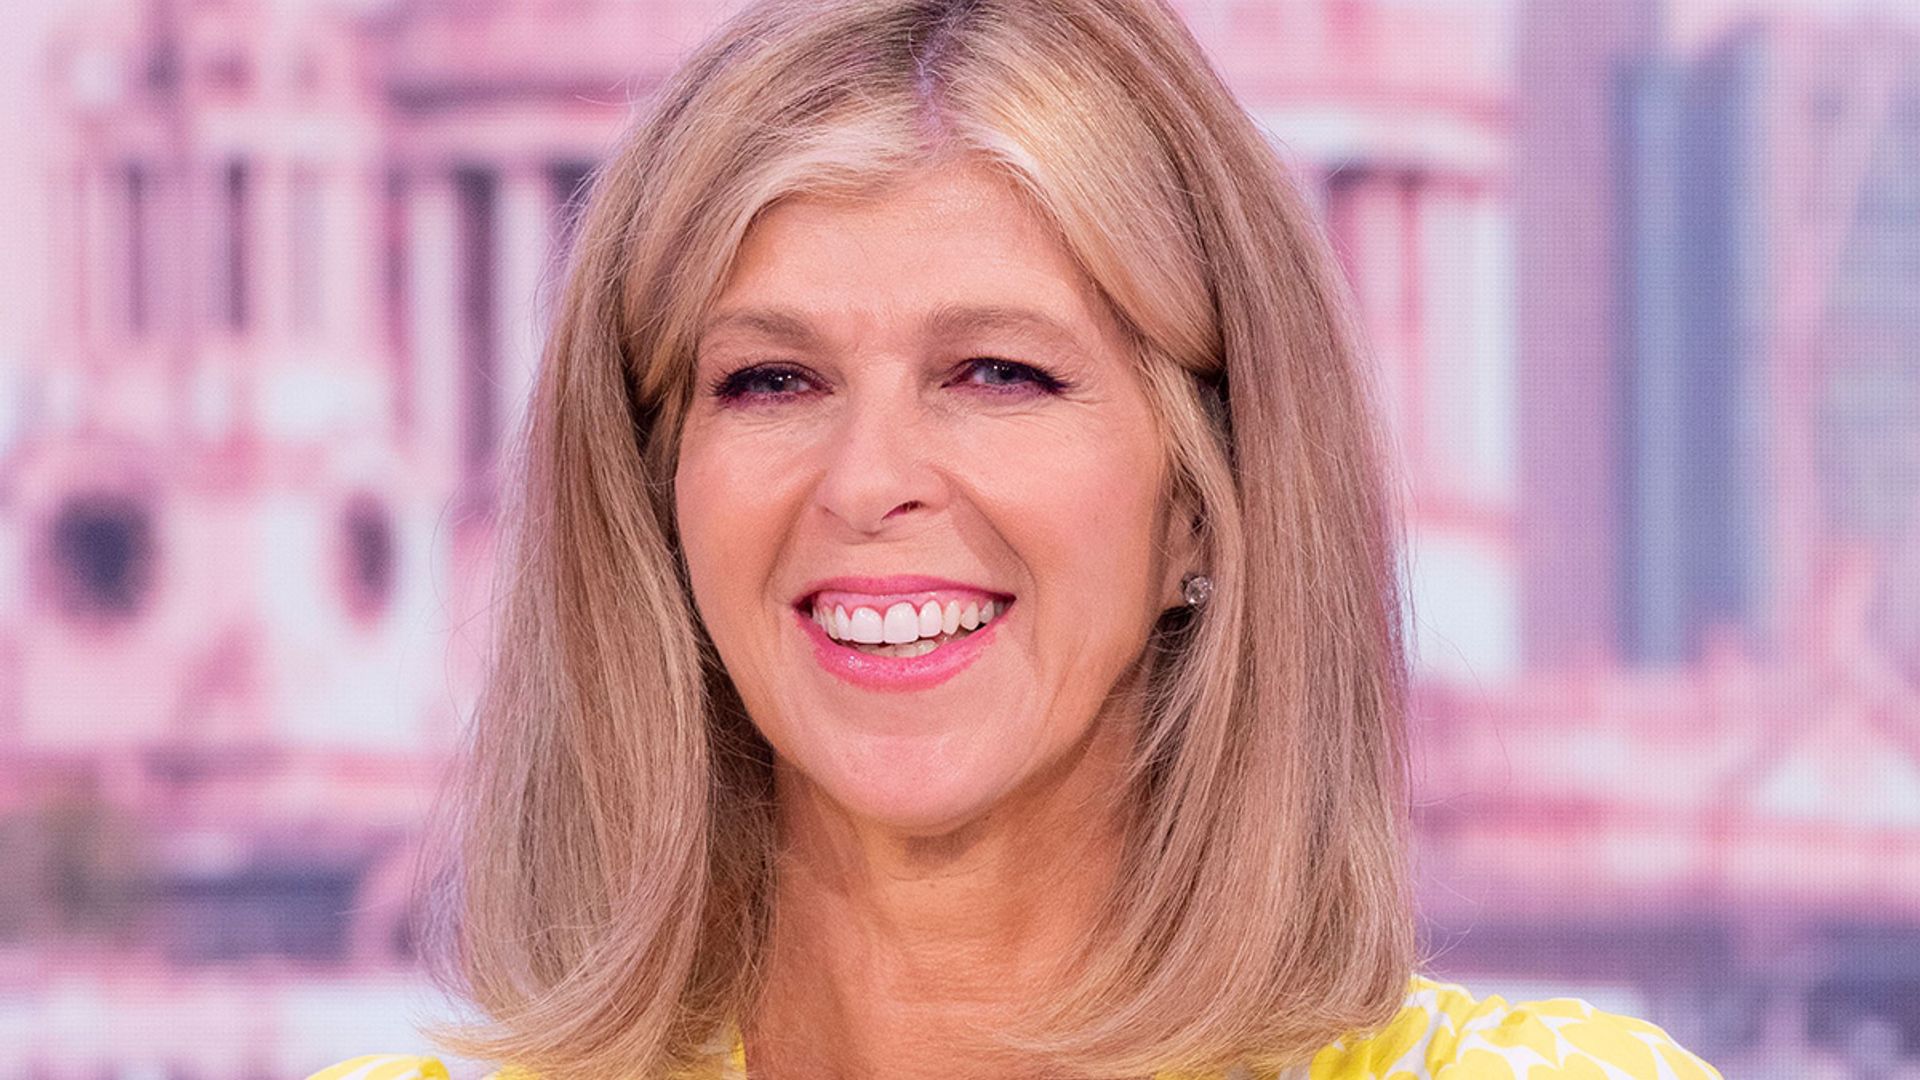 Gmb S Kate Garraway Looks Incredible In The Dreamiest Belted Floral Dress And Wow Hello